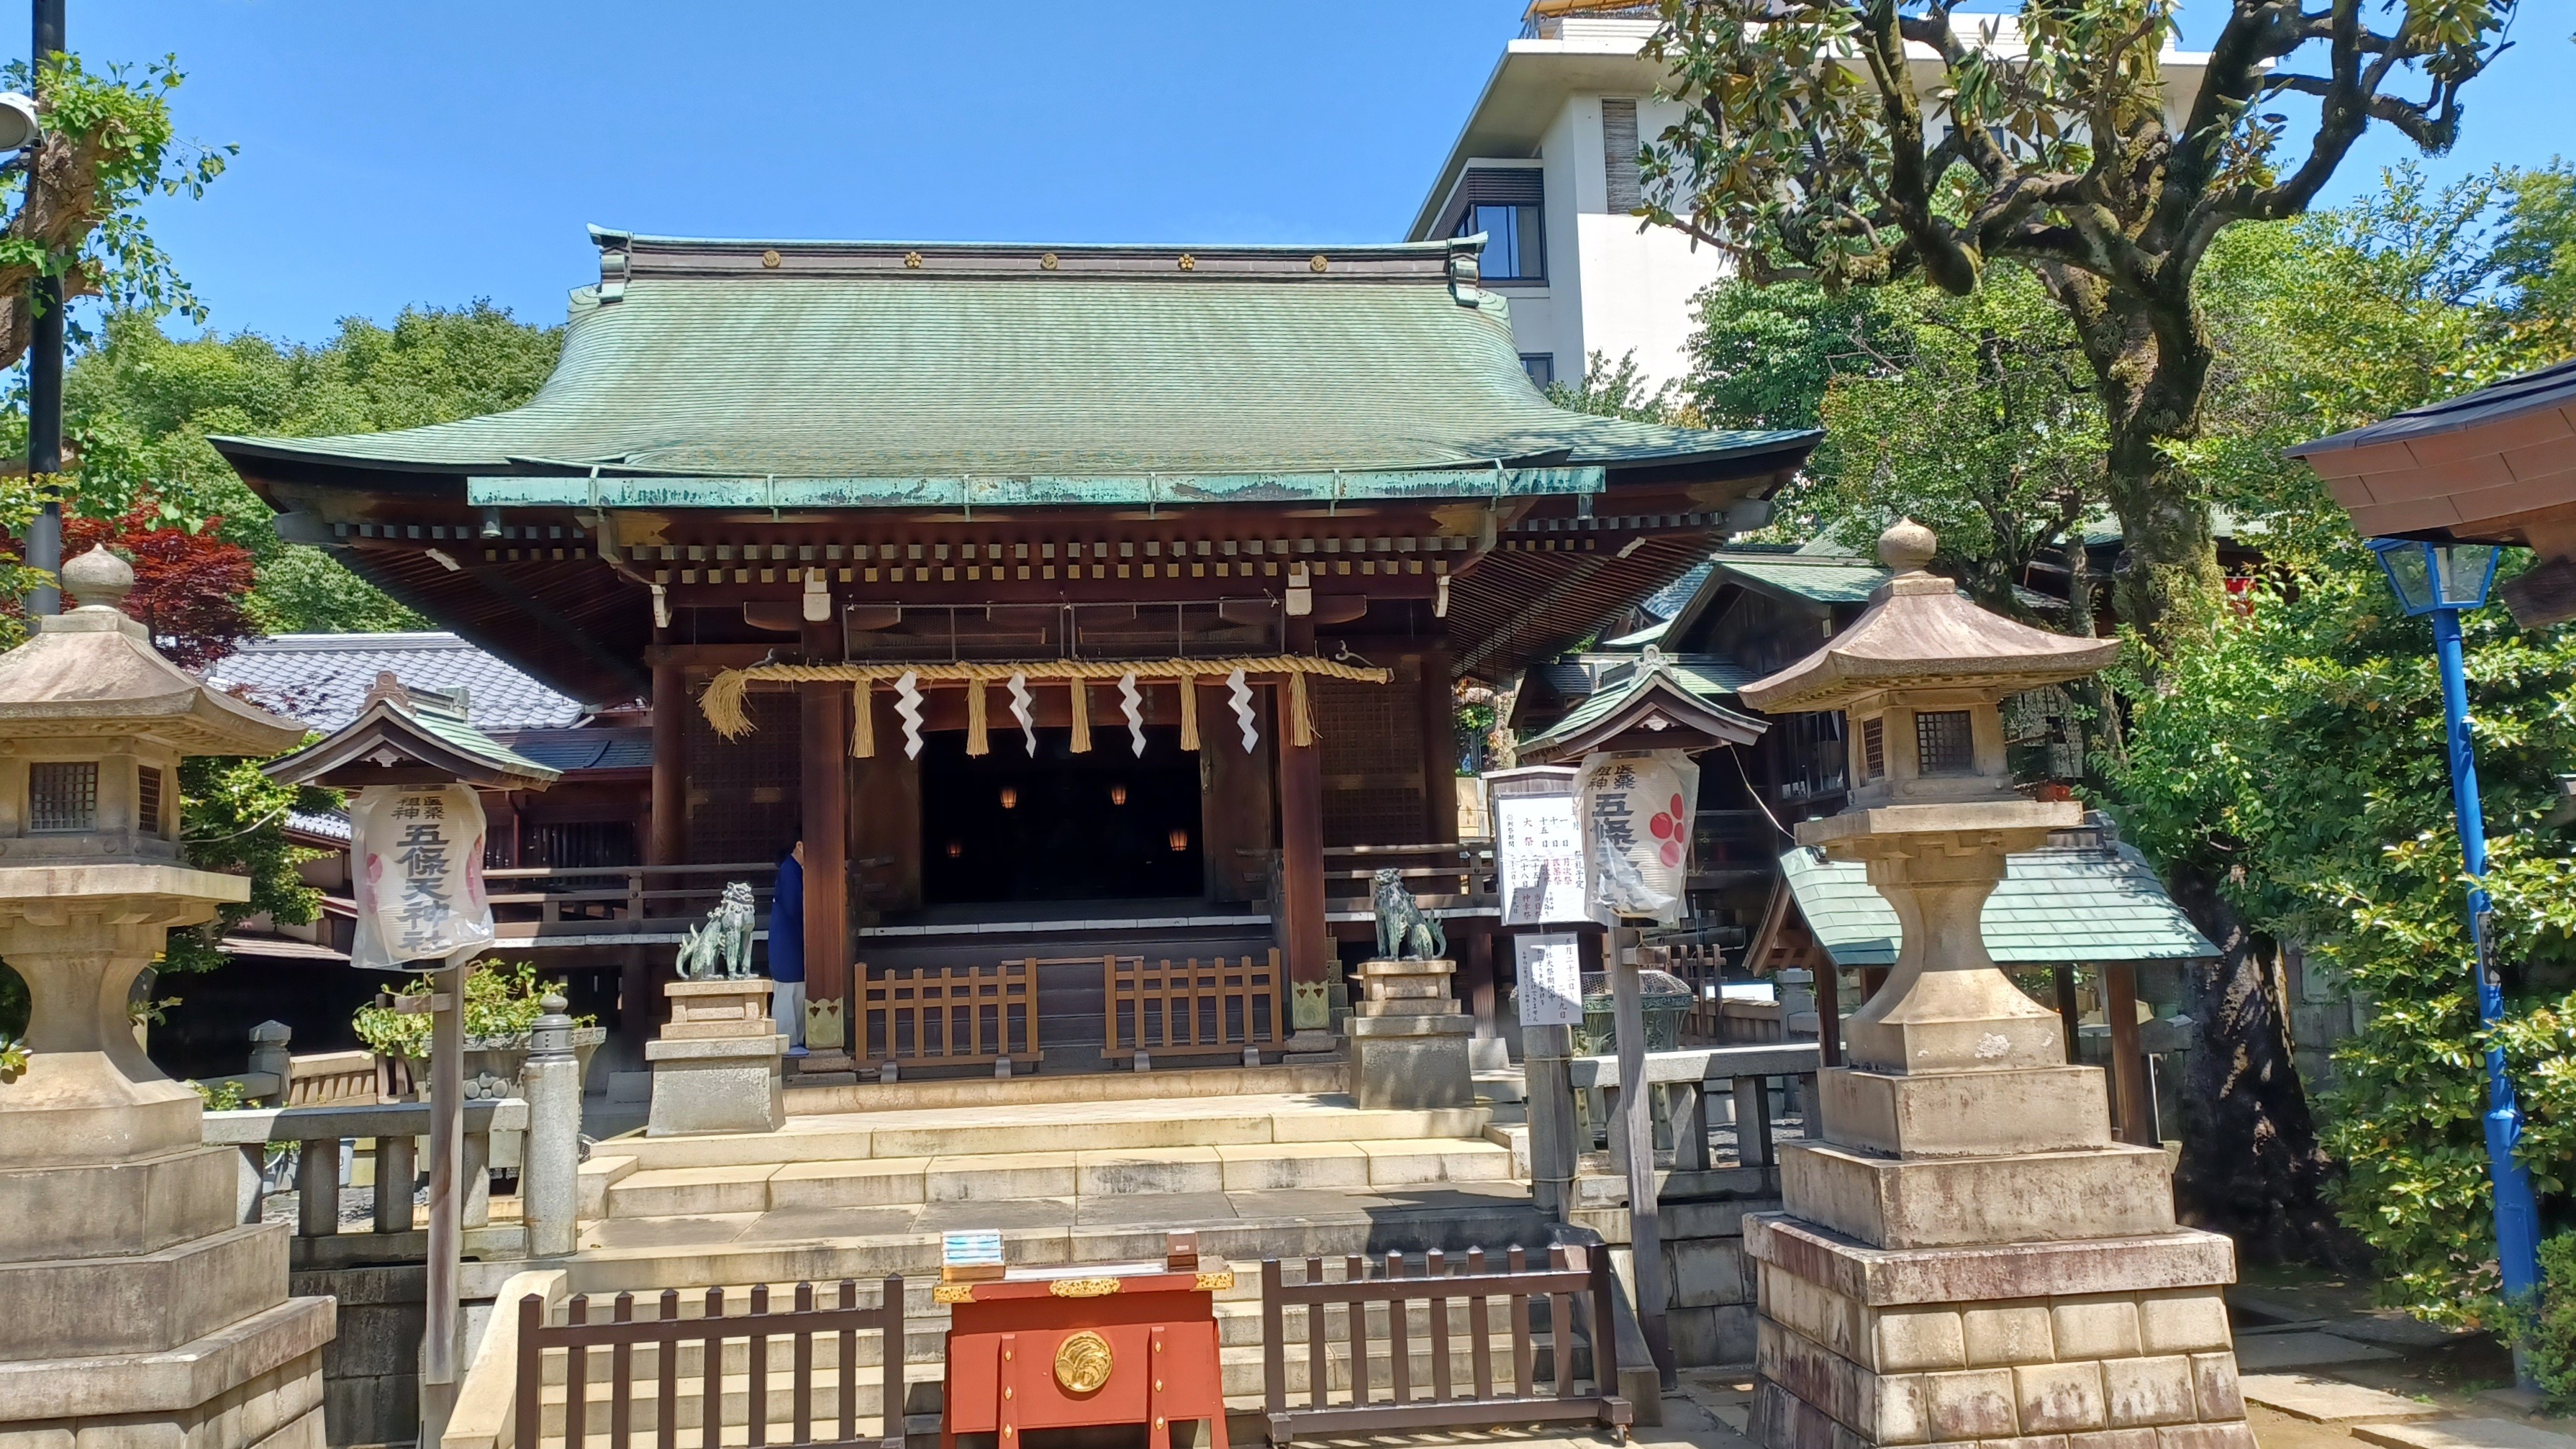 A dark brown shrine with a yellow rope above the prayer area (put up horizontally). There are stone lanterns on the left and right side in front of the building.